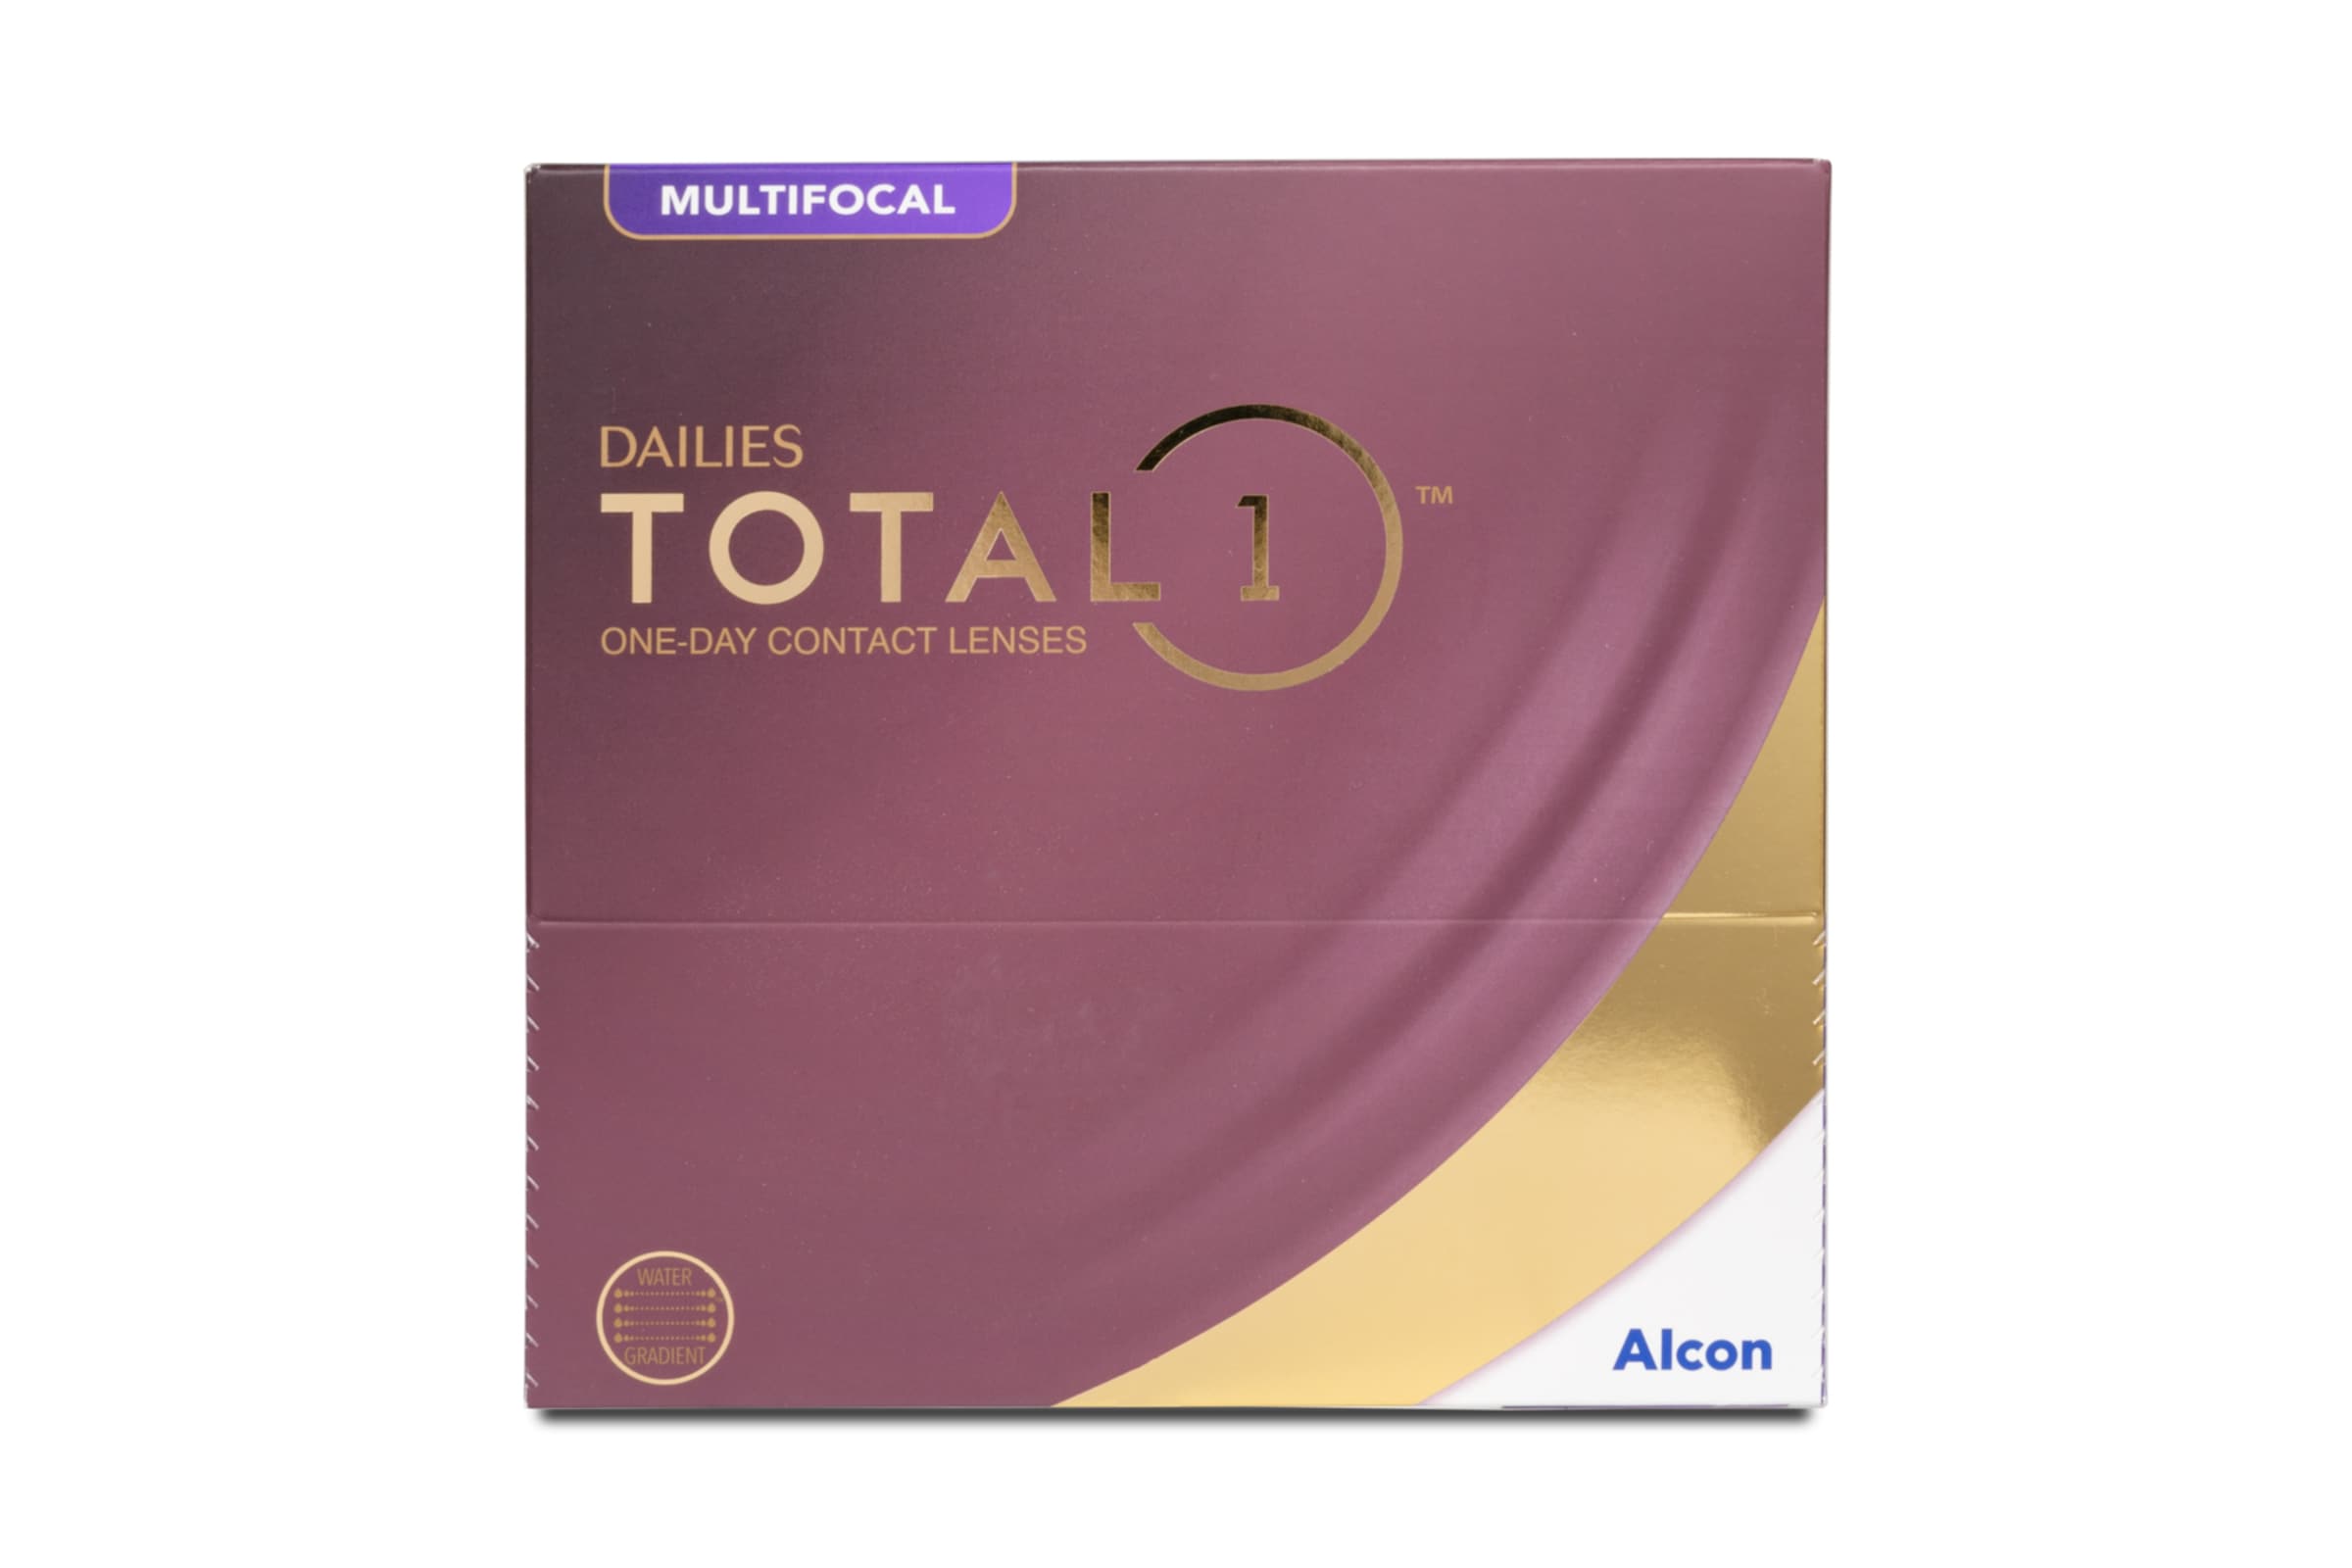 Alcon Dailies Total 1 Multifocal (90er Packung) Tageslinsen (0 dpt, Addition Medium (1,50 - 2,00) & BC 8.5)